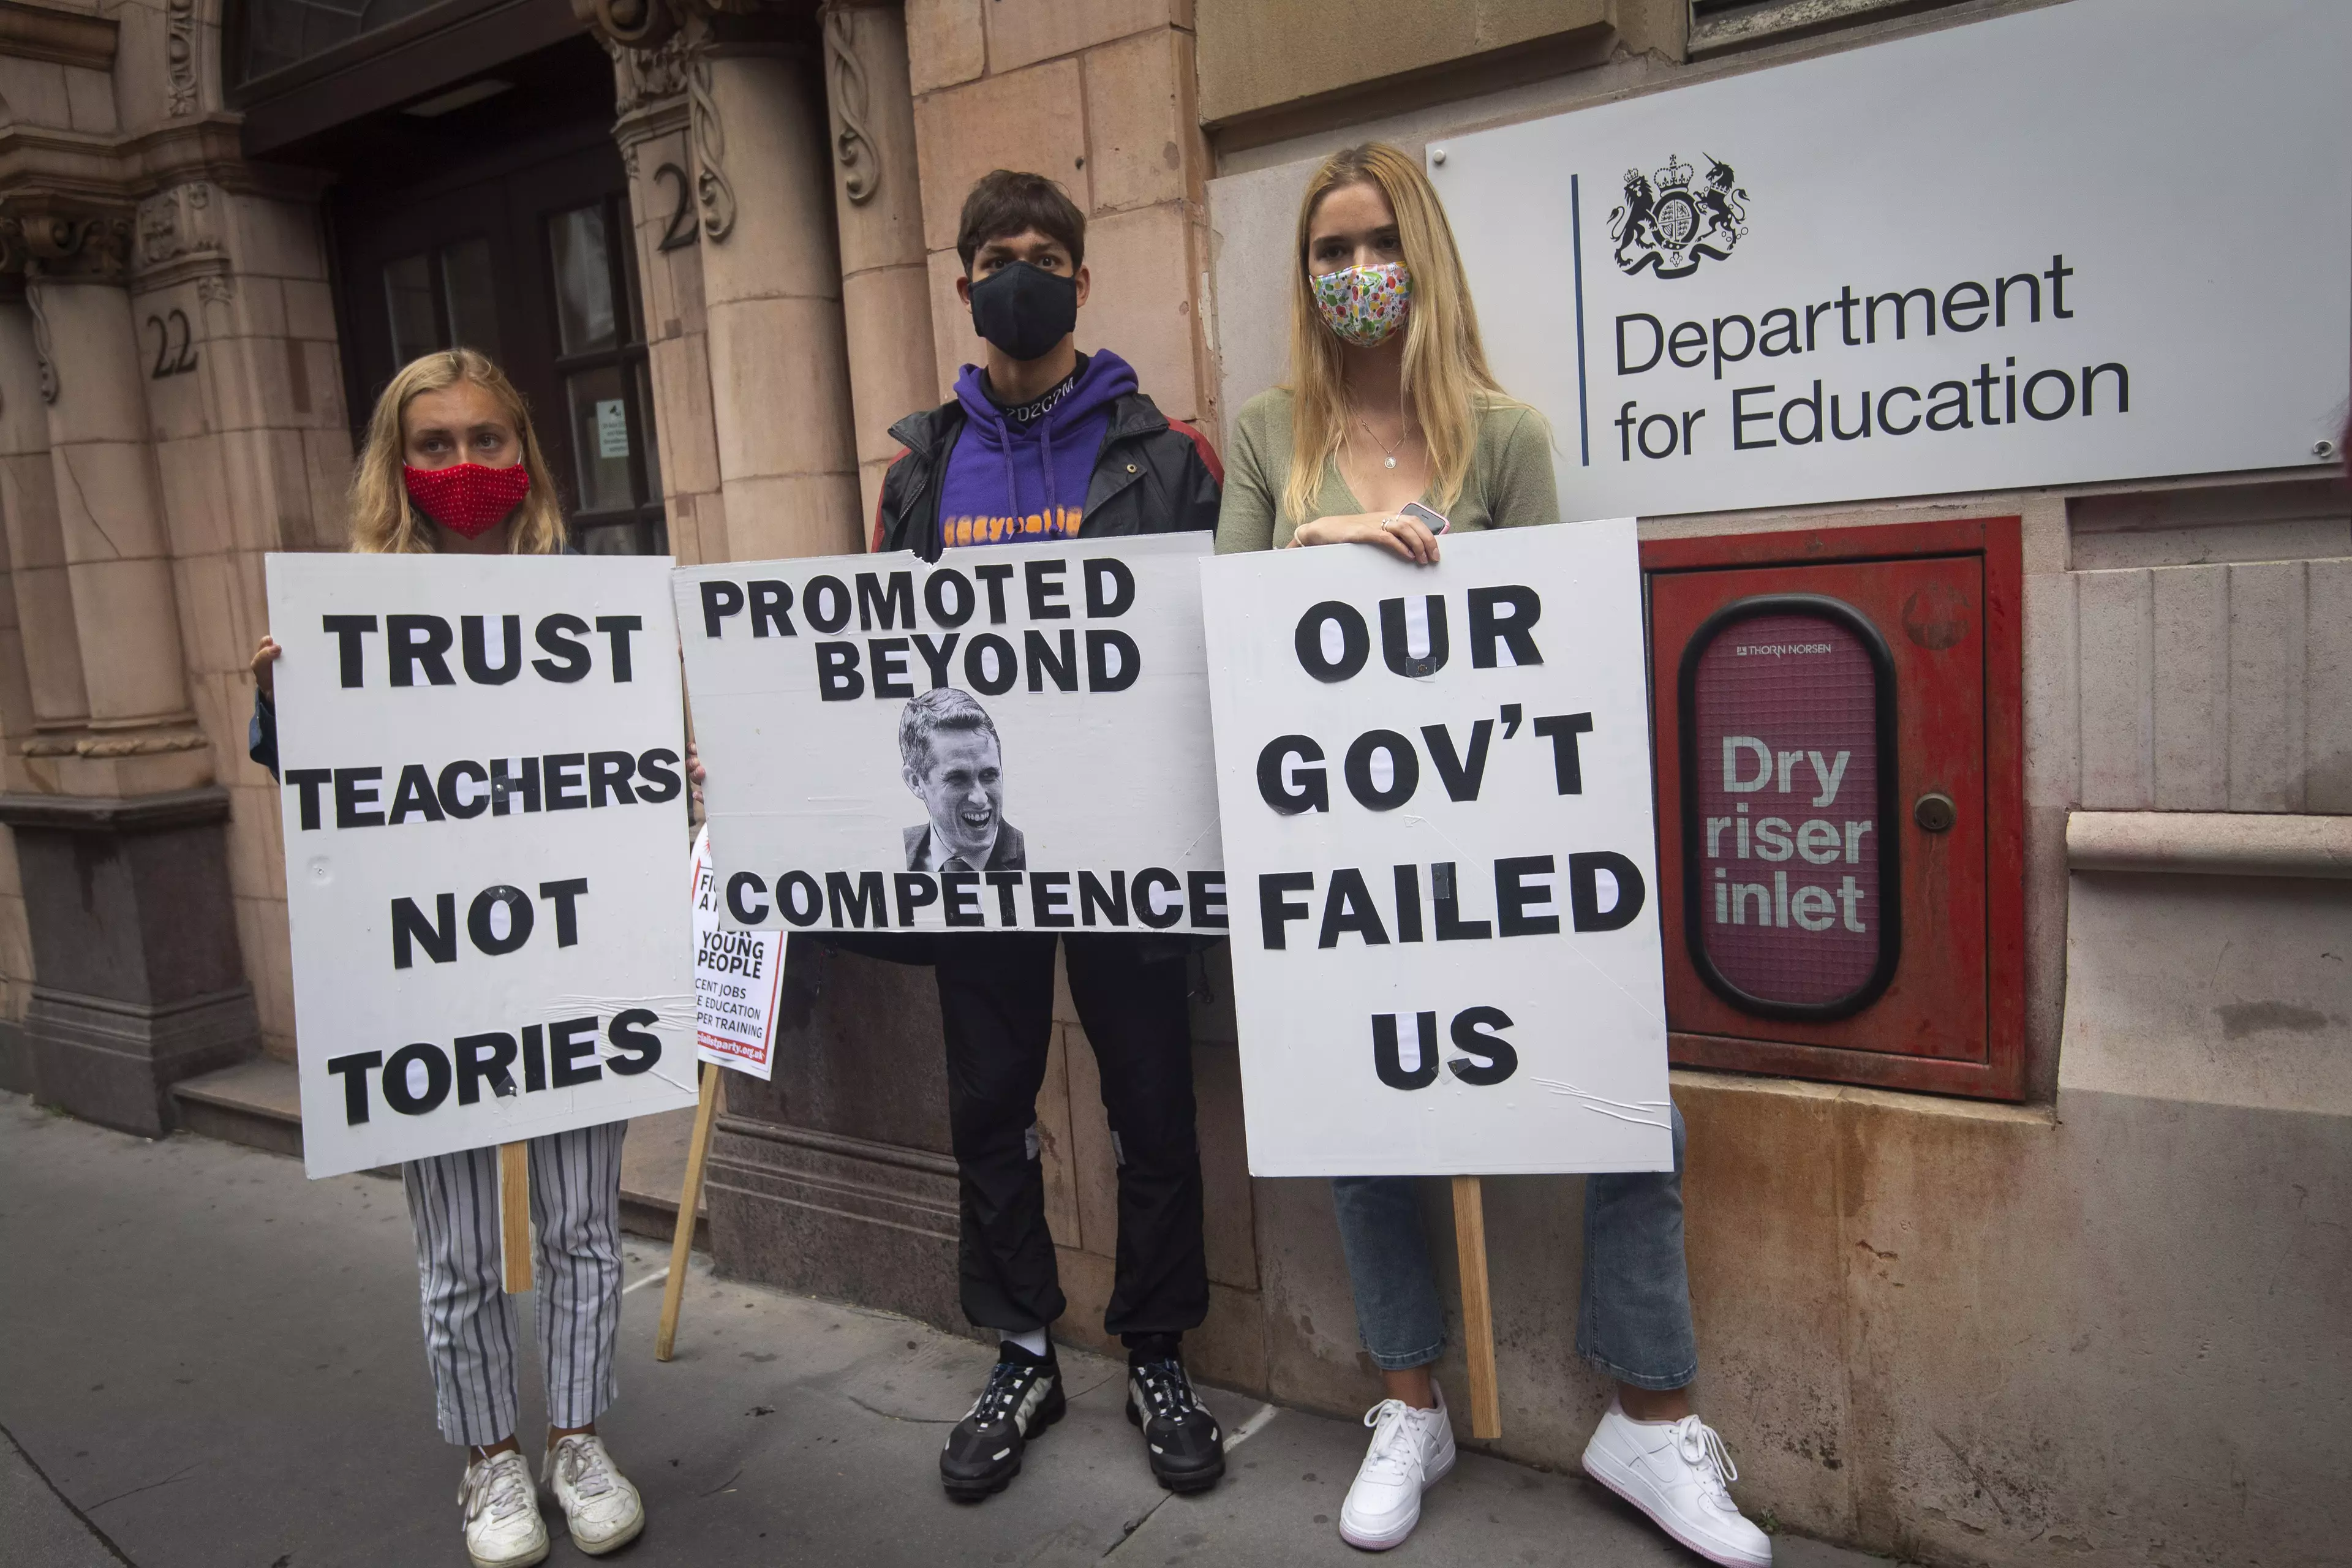 A-level students have protested the new system (